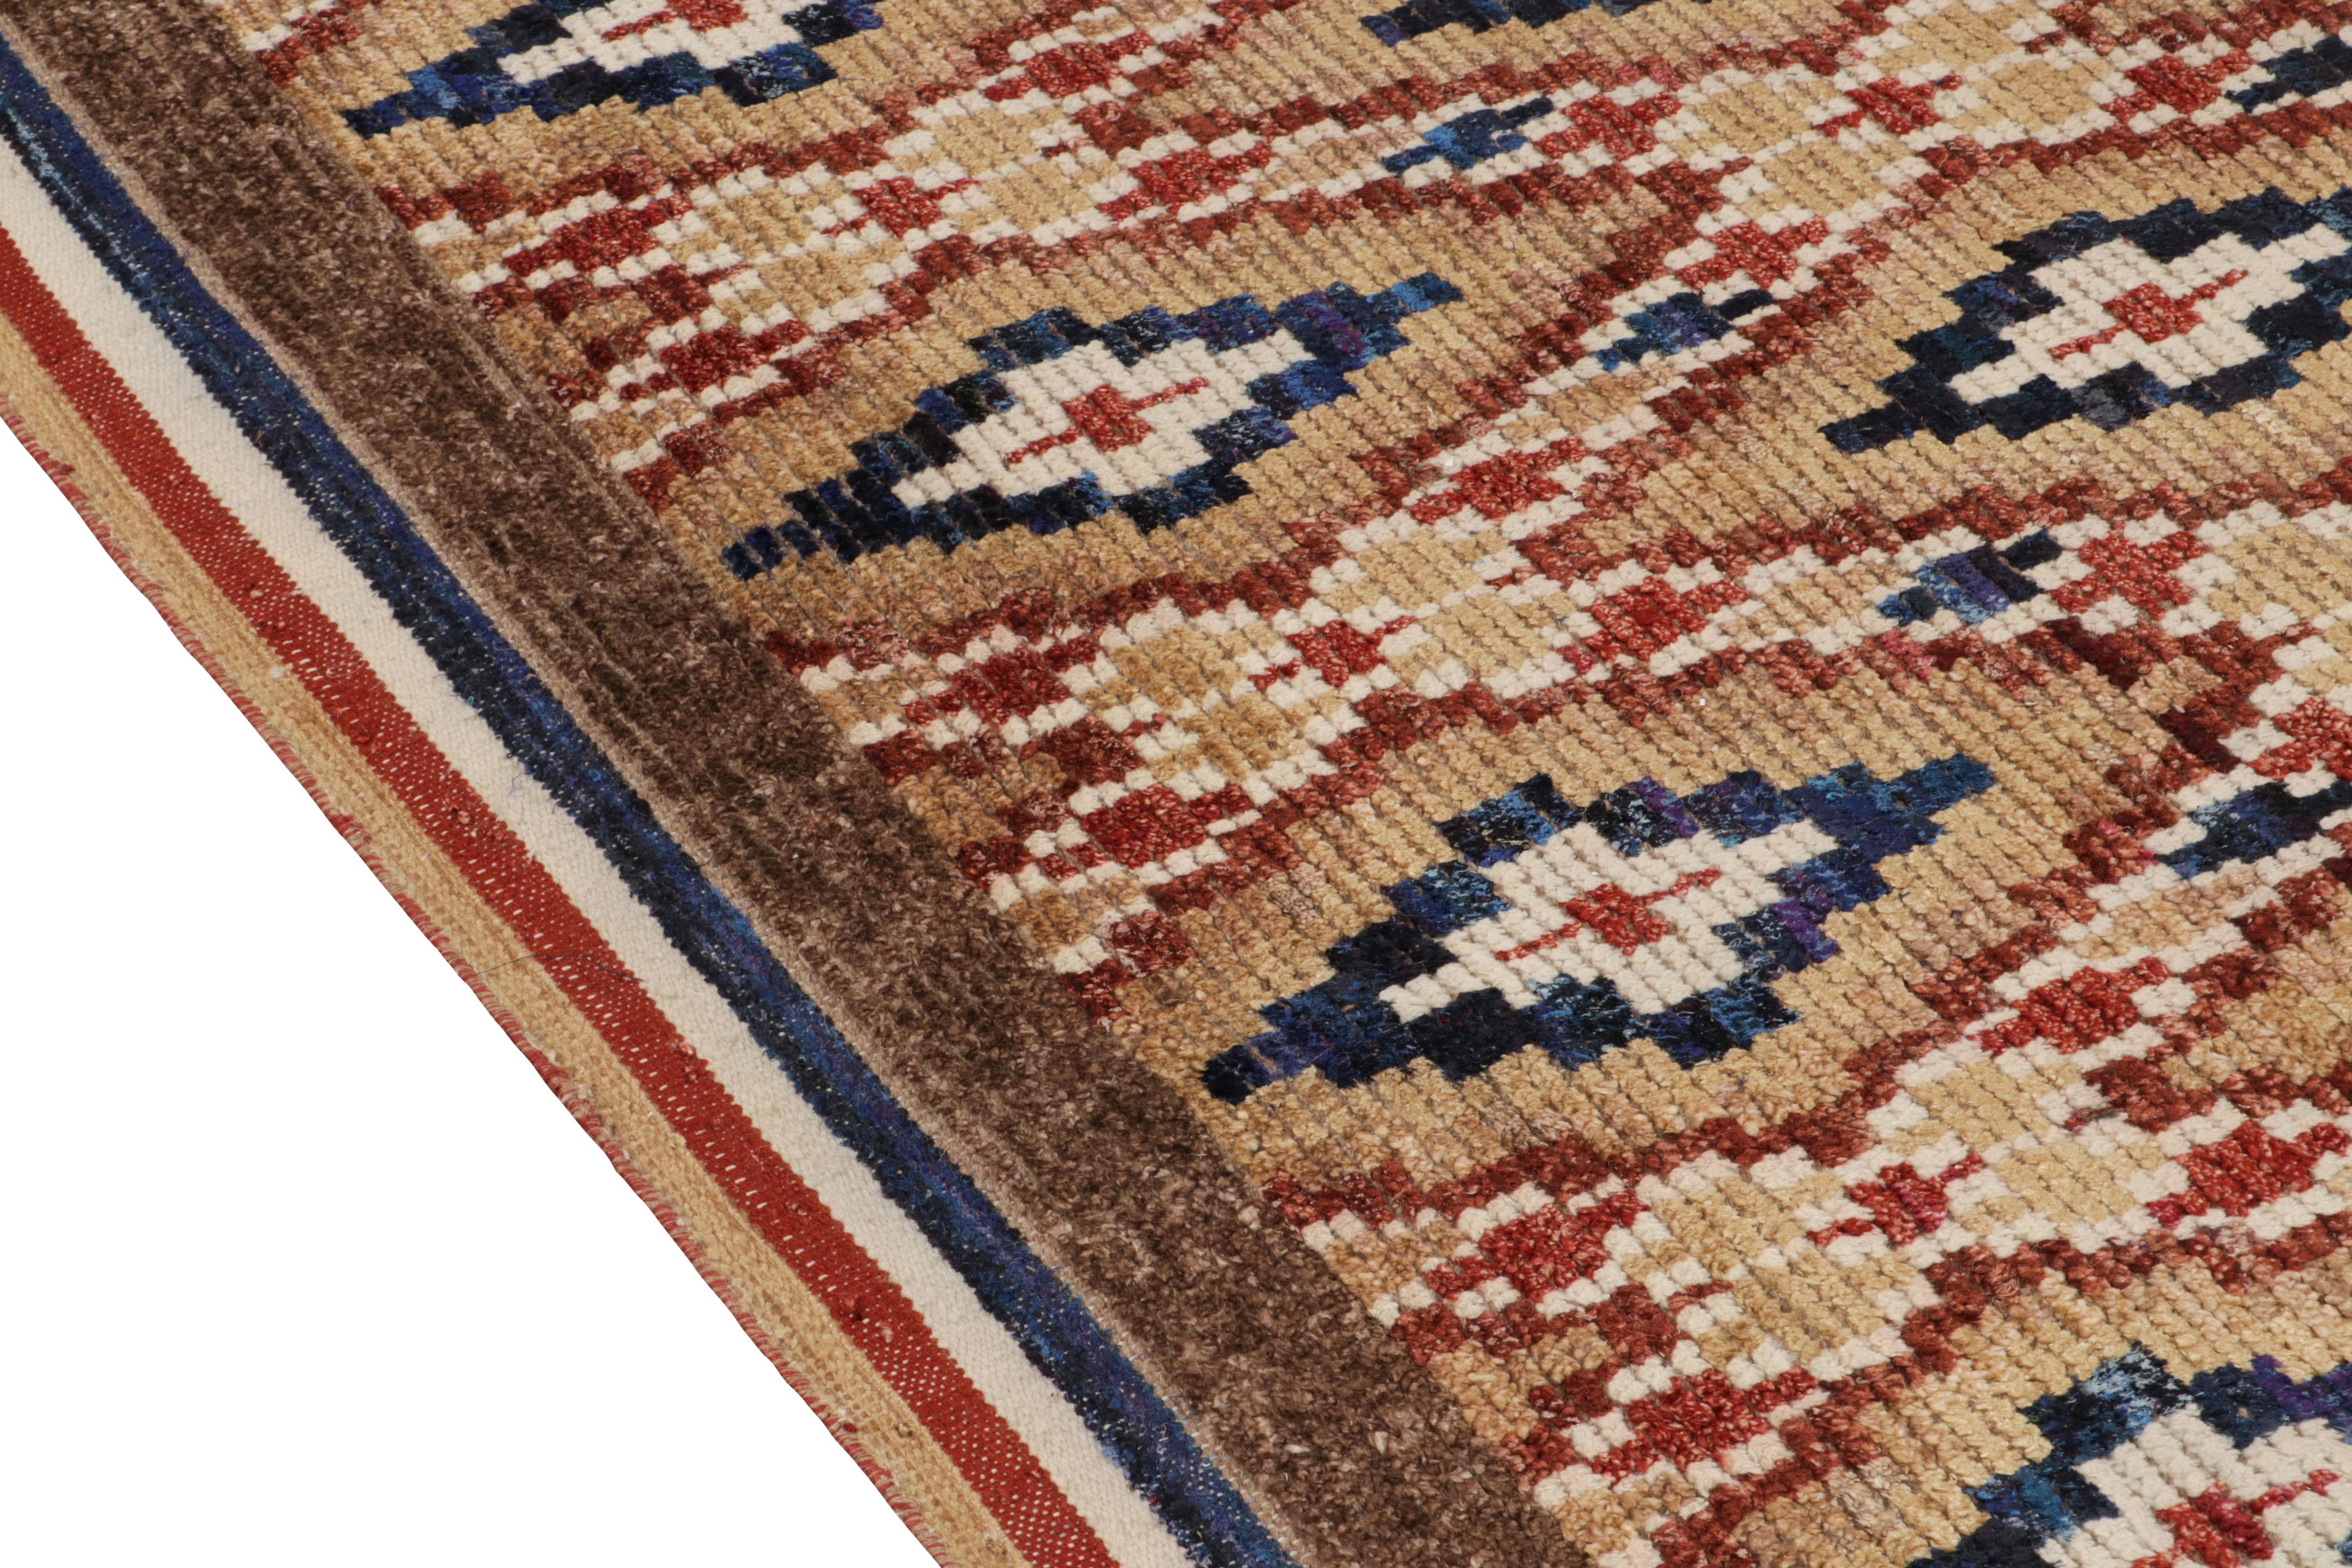 Rug & Kilim's Moroccan Style Rug in Beige-Brown, Red and Blue Diamond Patterns In New Condition For Sale In Long Island City, NY